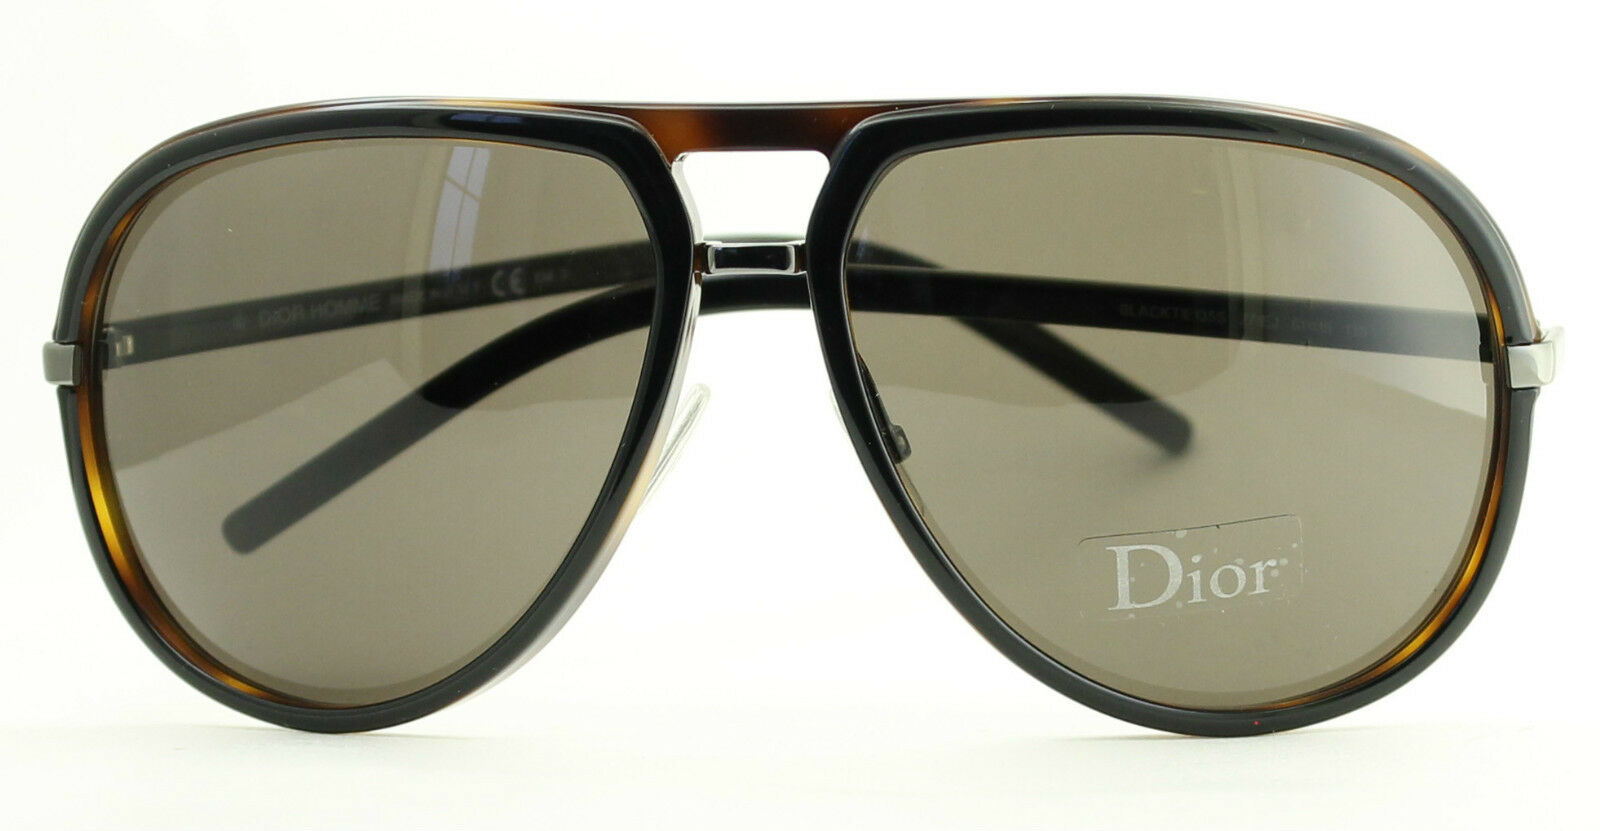 DIOR HOMME 0169S HVL 140 Sunglasses BNIB Brand New in Case - ITALY - TRUSTED